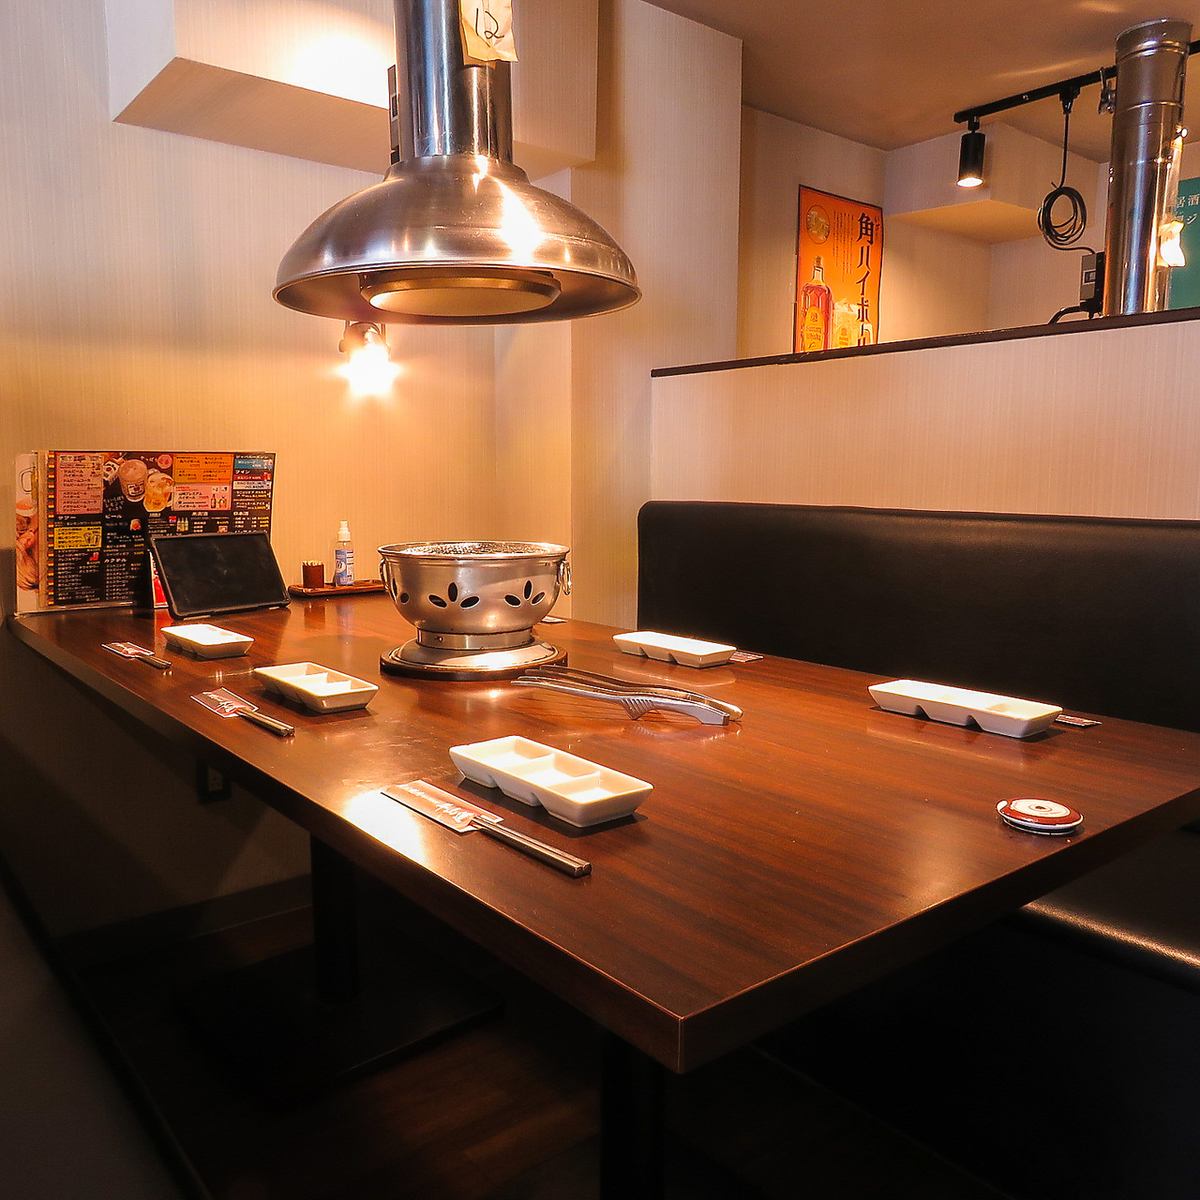 All-you-can-eat authentic charcoal-grilled yakiniku on comfortable sofa seats! 90 minutes, 35 dishes, 1,980 JPY~◎